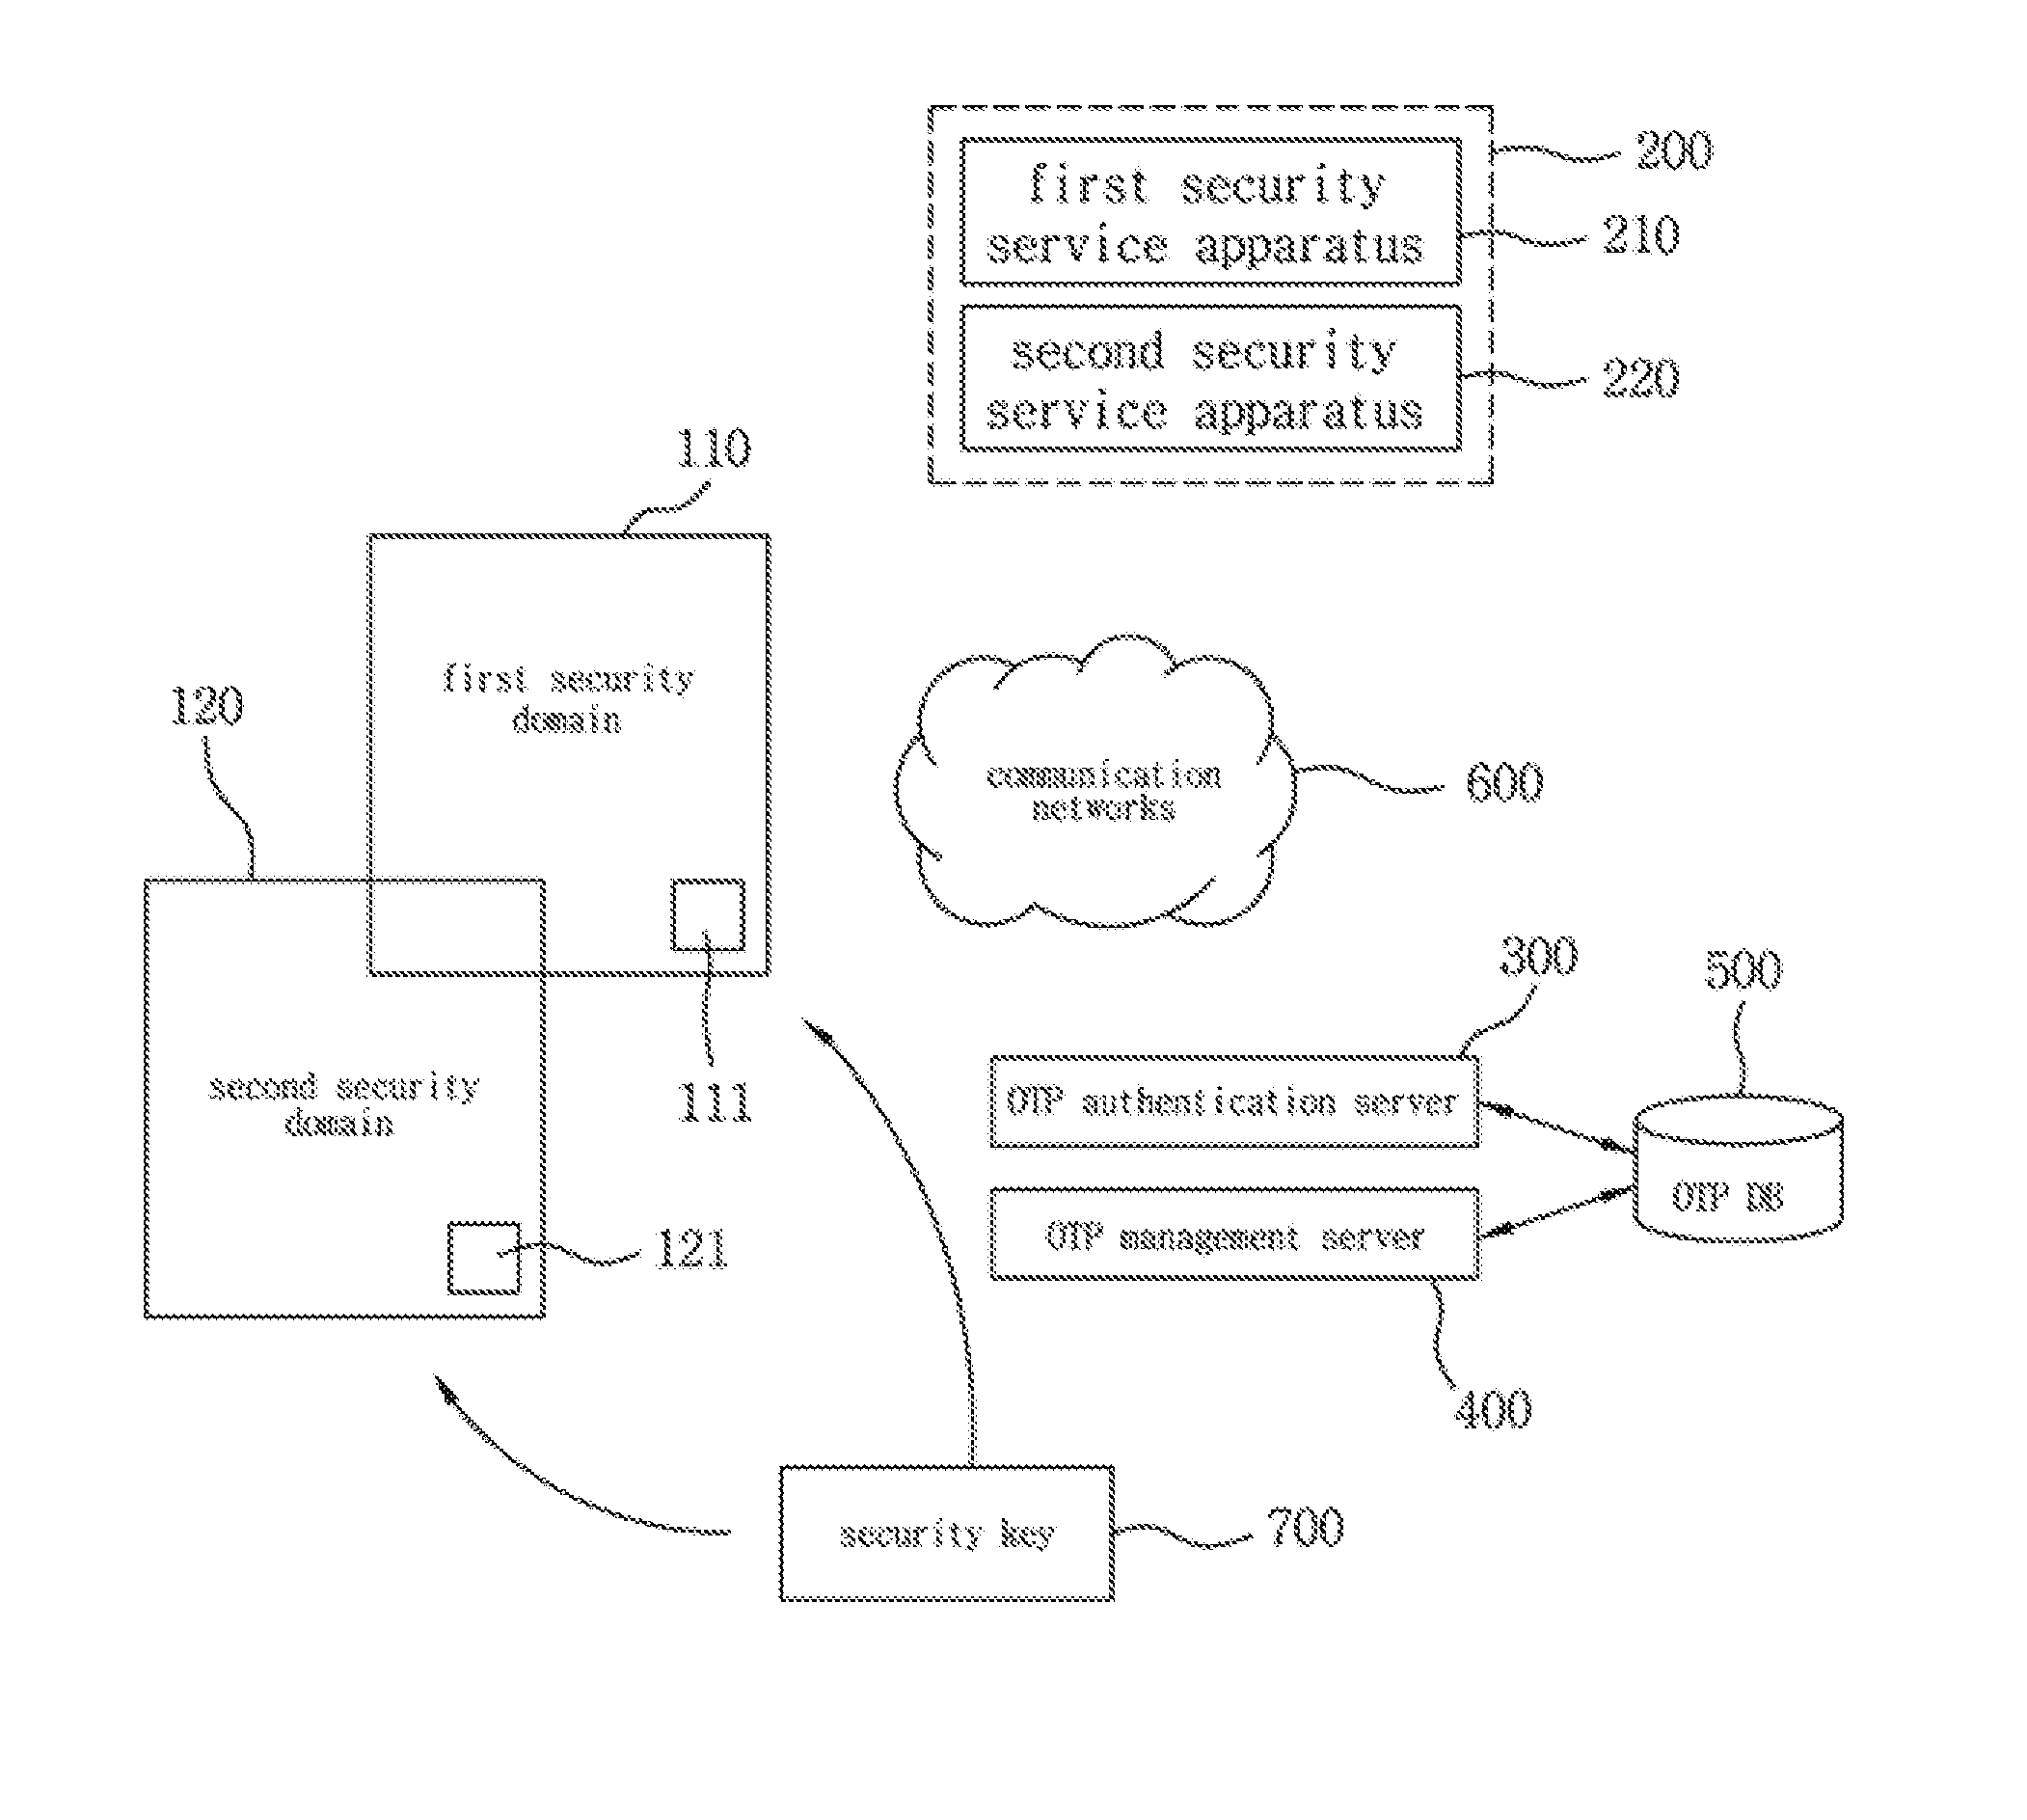 Security key using multi-otp, security service apparatus, security system